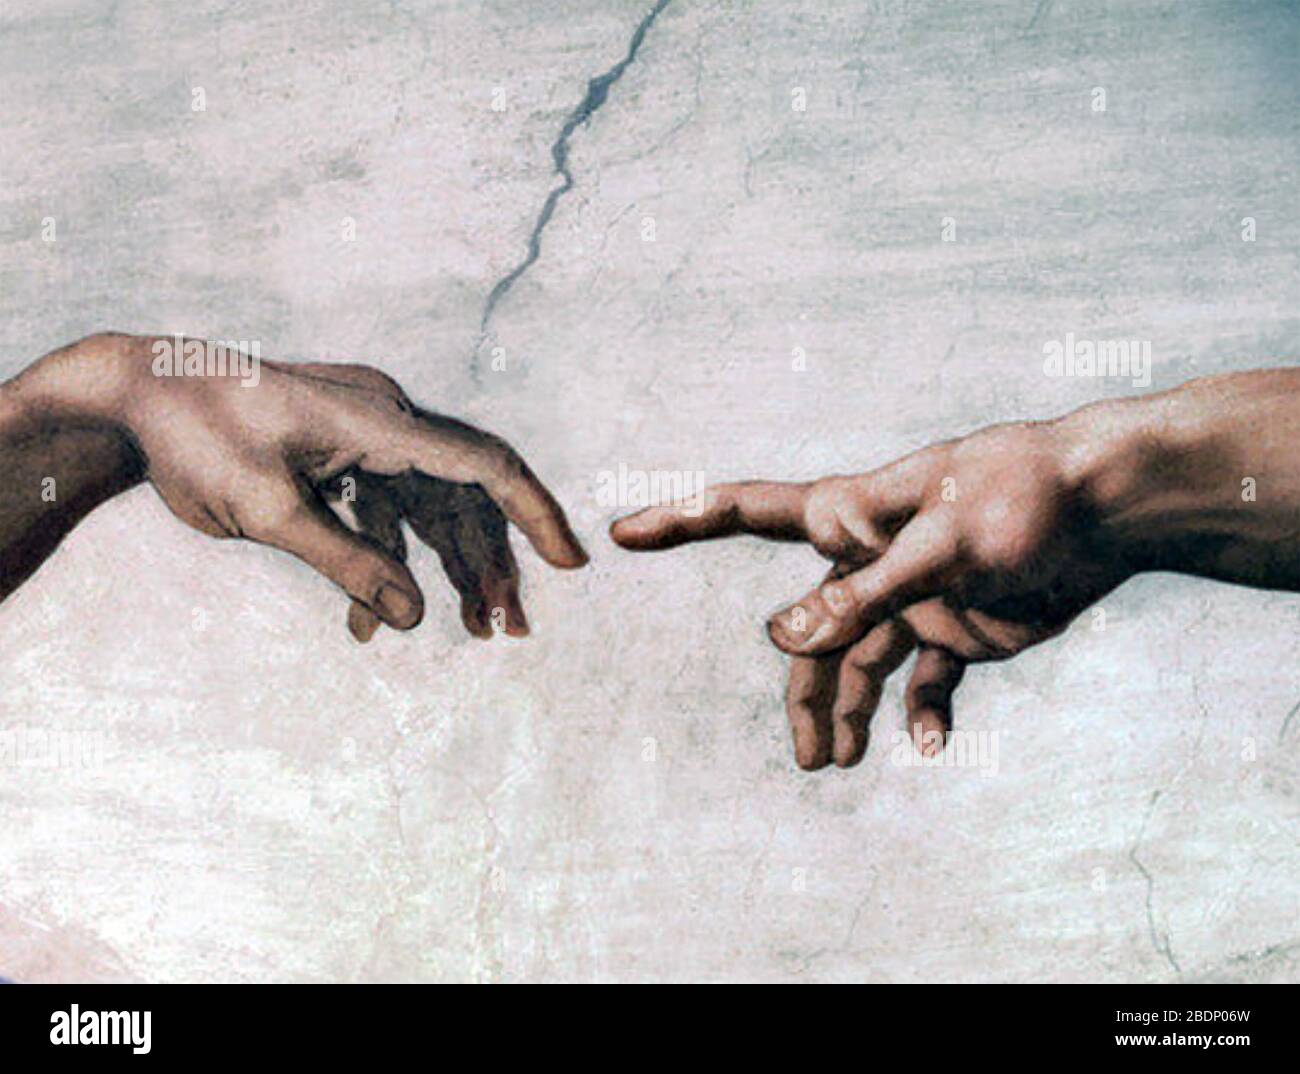 THE CREATION OF ADAM (detail) by Michelangelo on the ceiling of the Sistine Chapel, Rome. Stock Photo